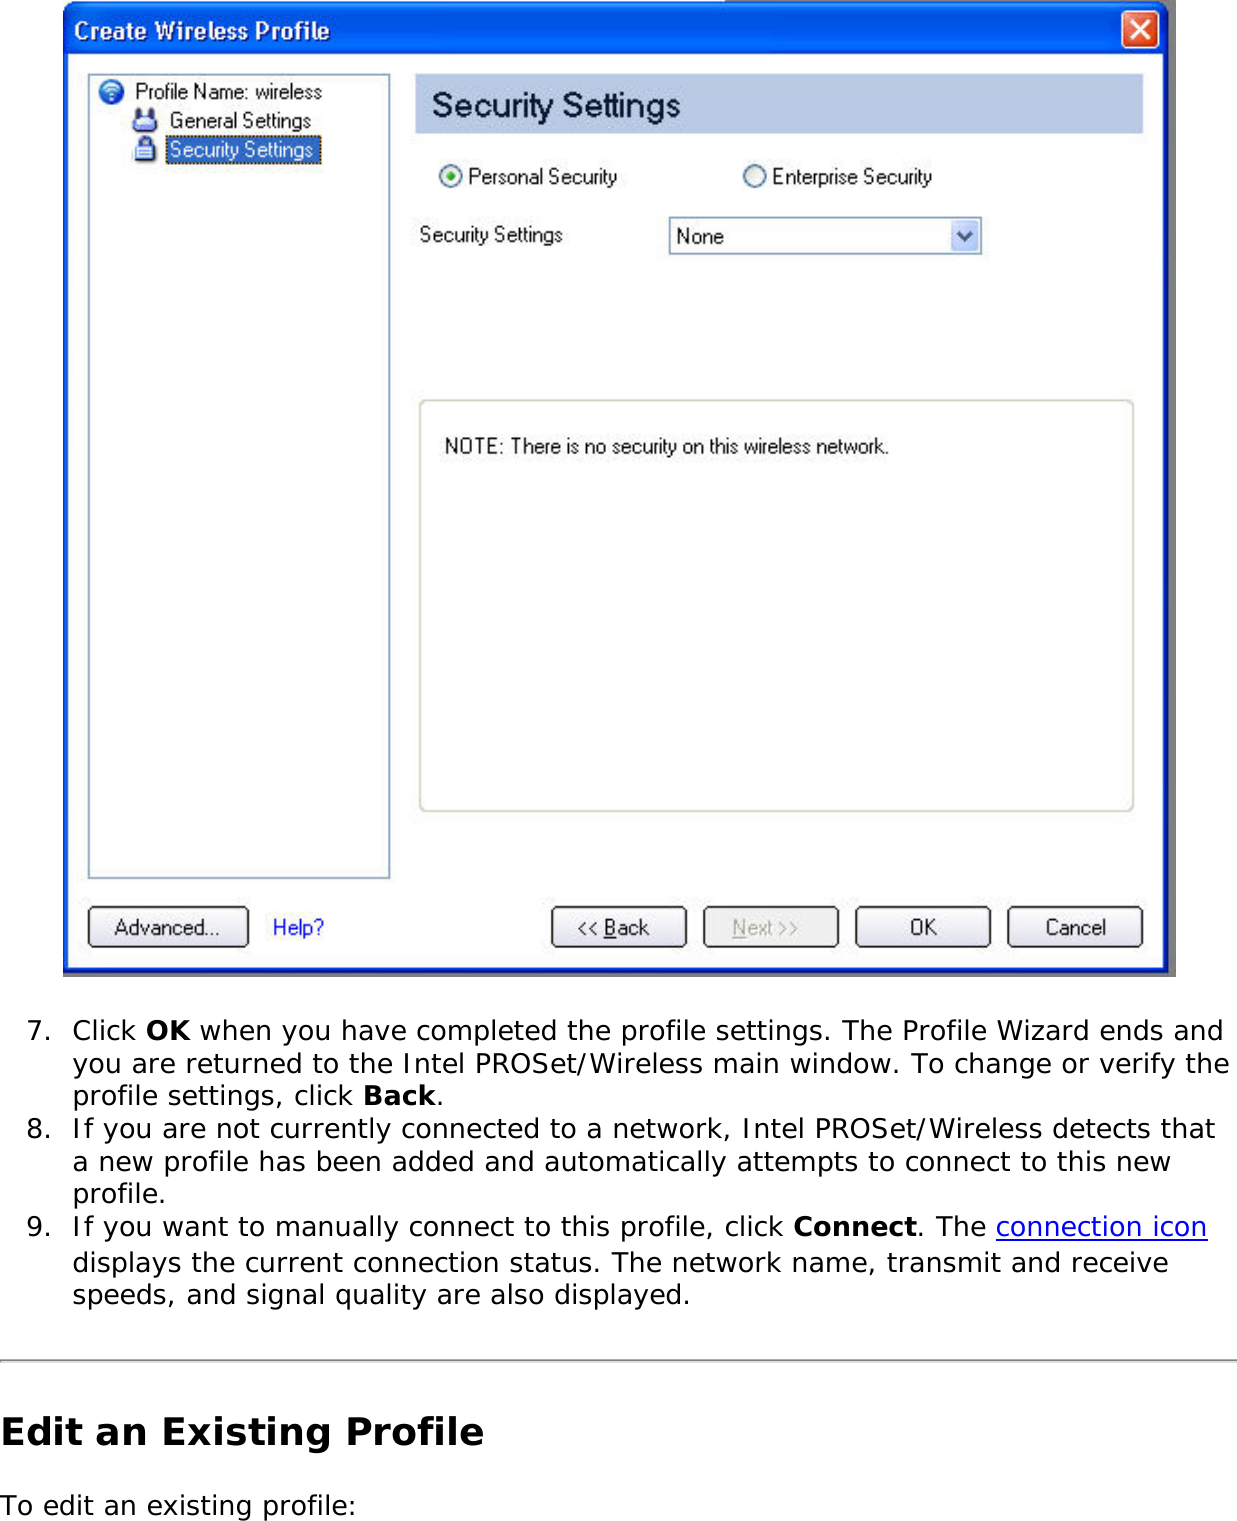  7.  Click OK when you have completed the profile settings. The Profile Wizard ends and you are returned to the Intel PROSet/Wireless main window. To change or verify the profile settings, click Back. 8.  If you are not currently connected to a network, Intel PROSet/Wireless detects that a new profile has been added and automatically attempts to connect to this new profile. 9.  If you want to manually connect to this profile, click Connect. The connection icon displays the current connection status. The network name, transmit and receive speeds, and signal quality are also displayed. Edit an Existing ProfileTo edit an existing profile: 